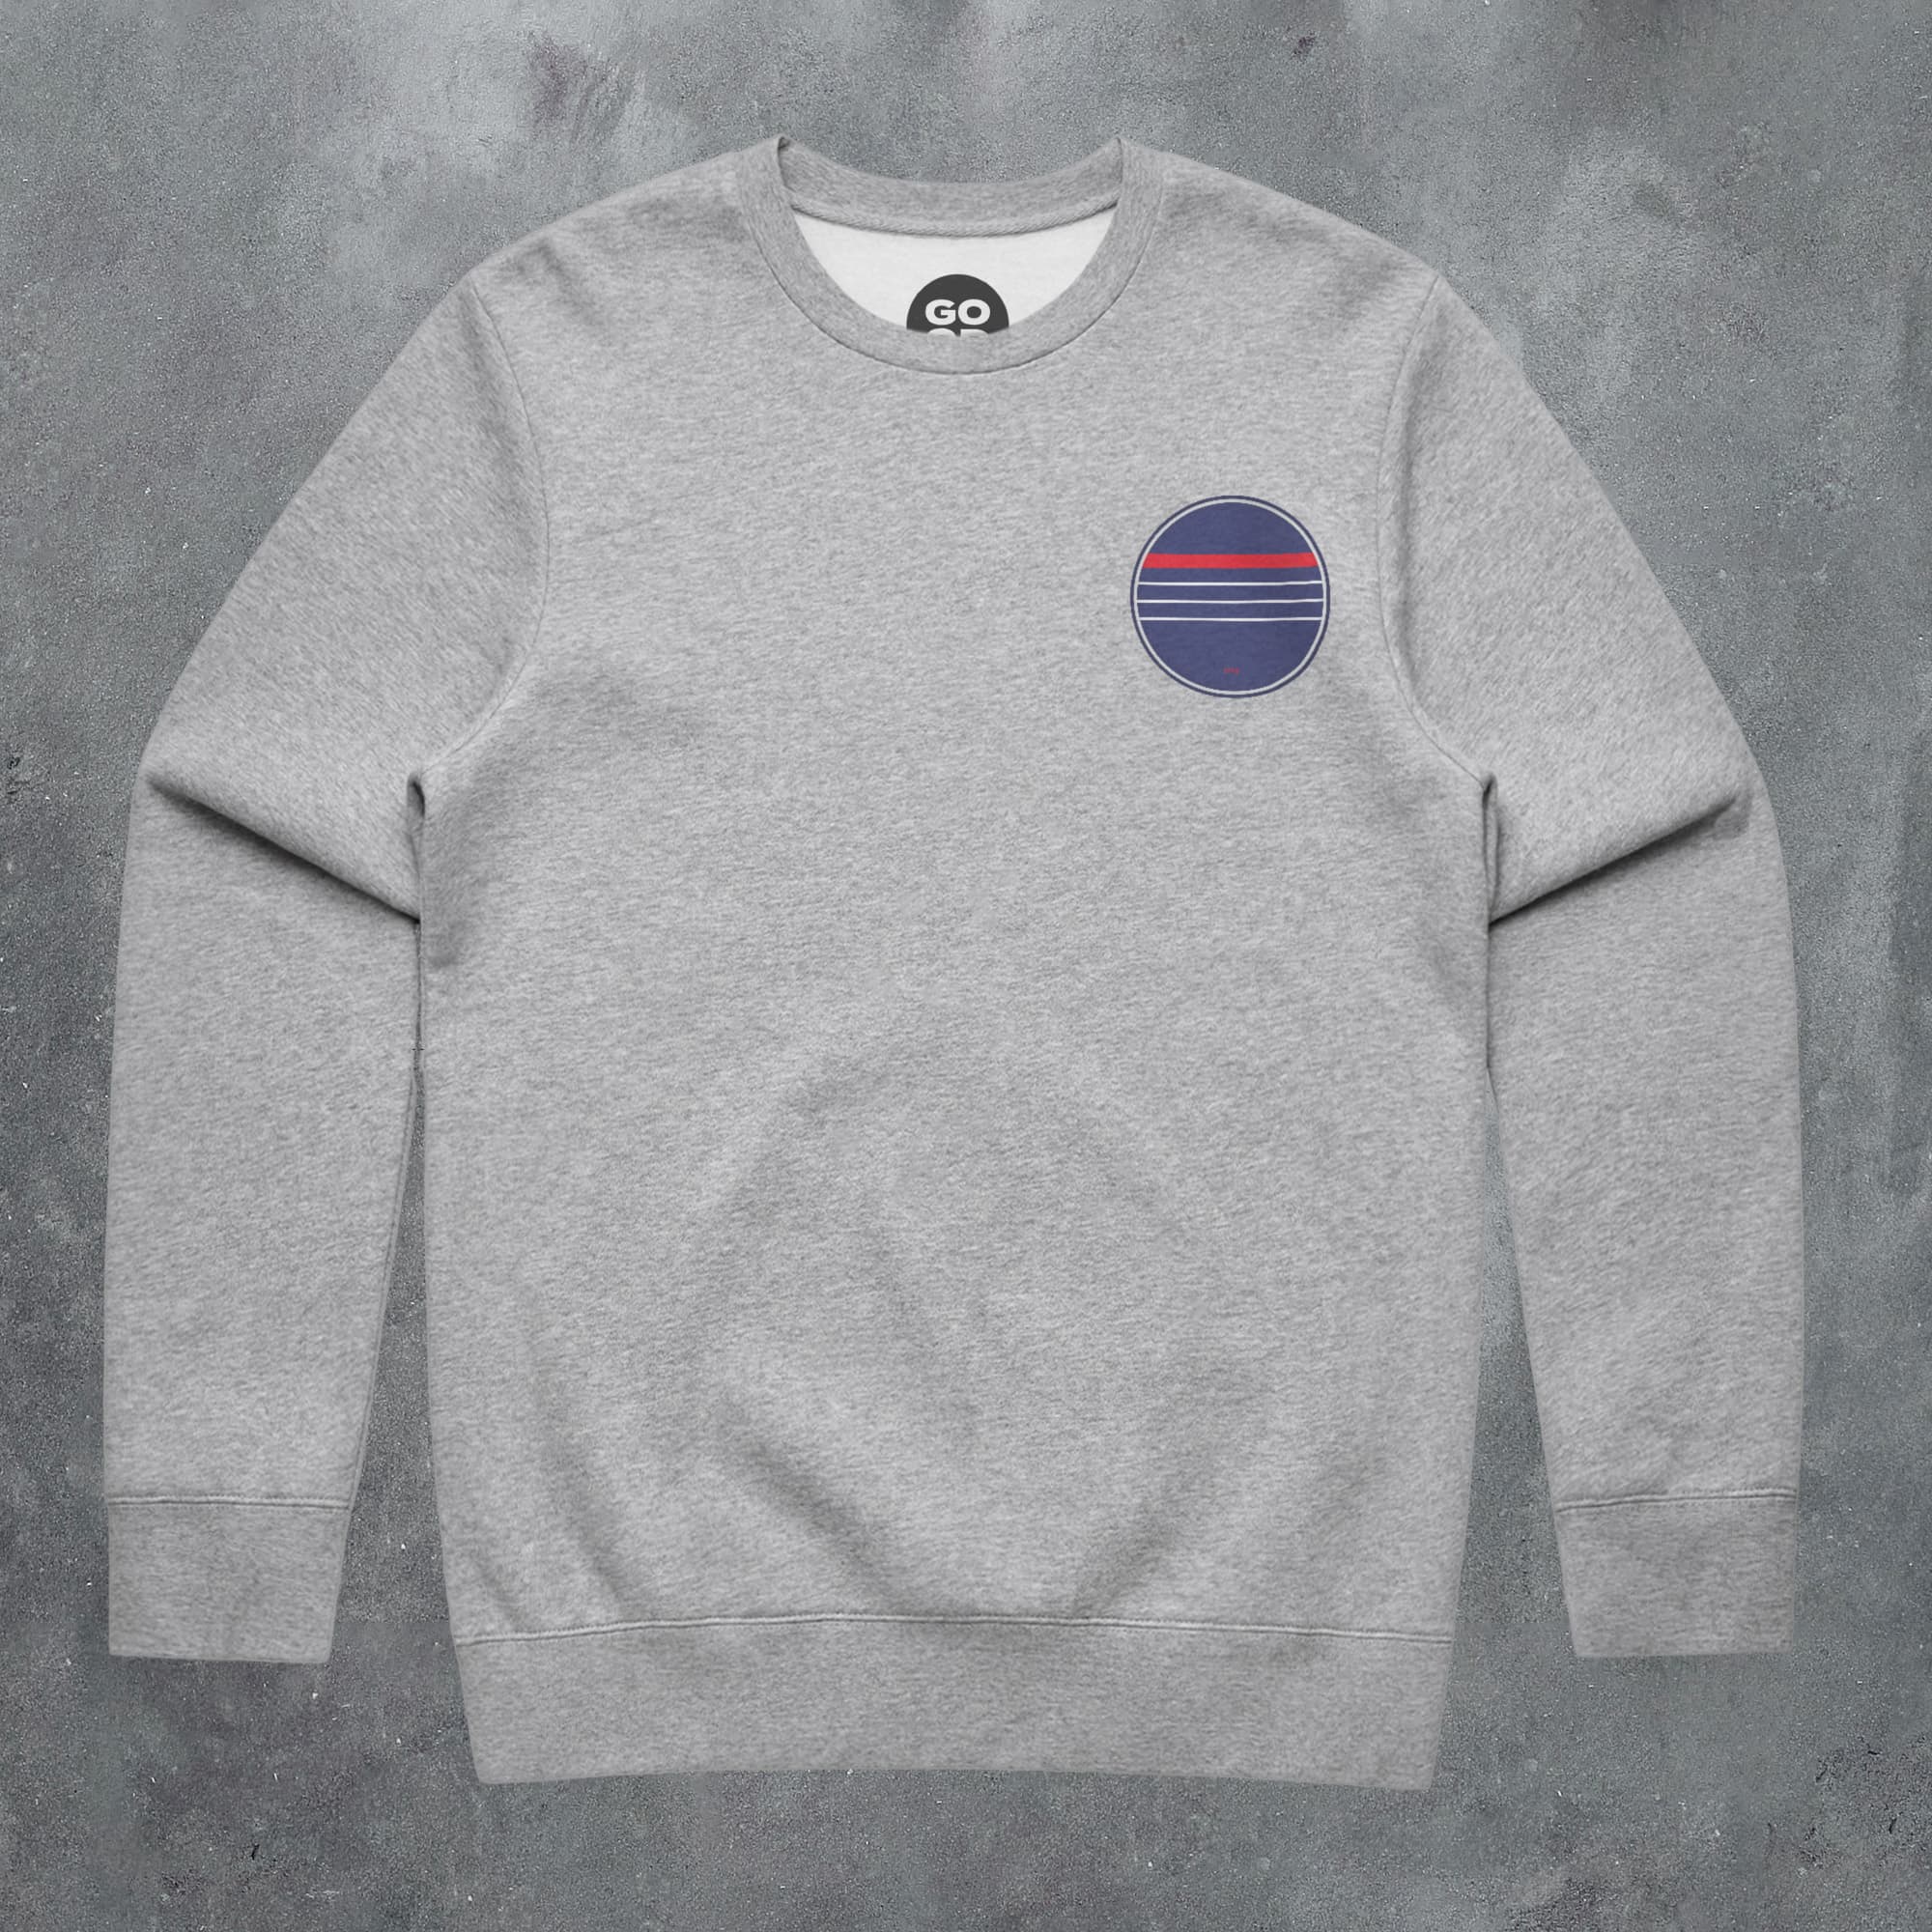 a grey sweatshirt with a red, white and blue stripe on the chest